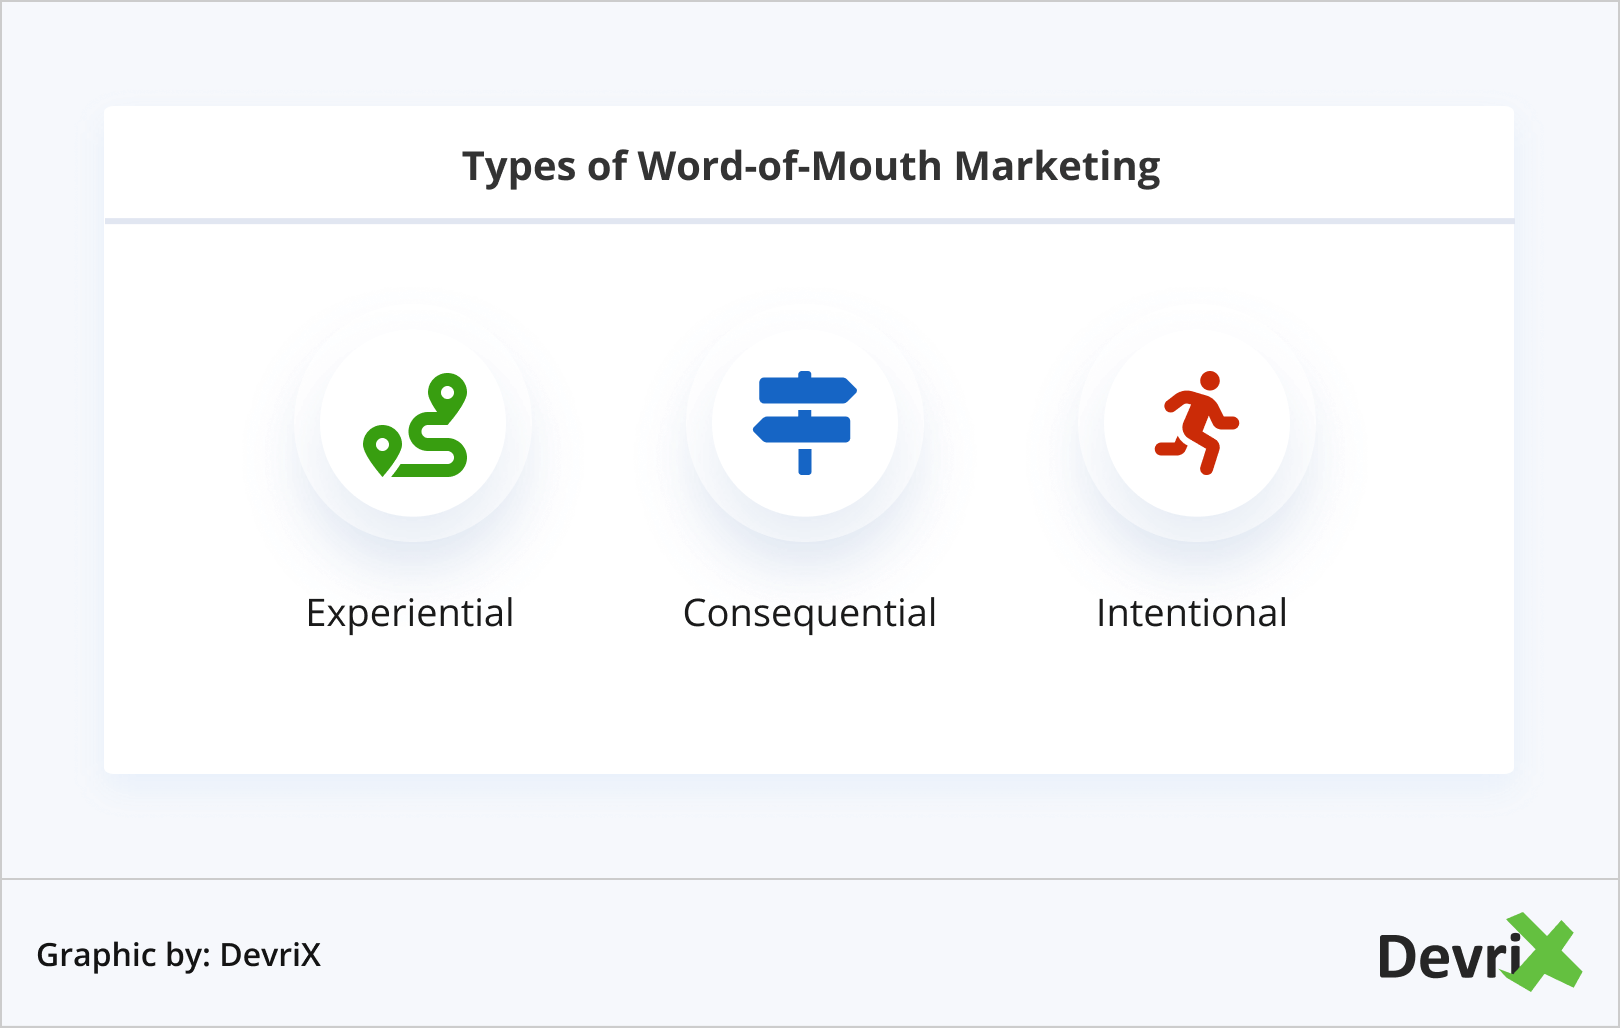 Types of Word-of-Mouth Marketing